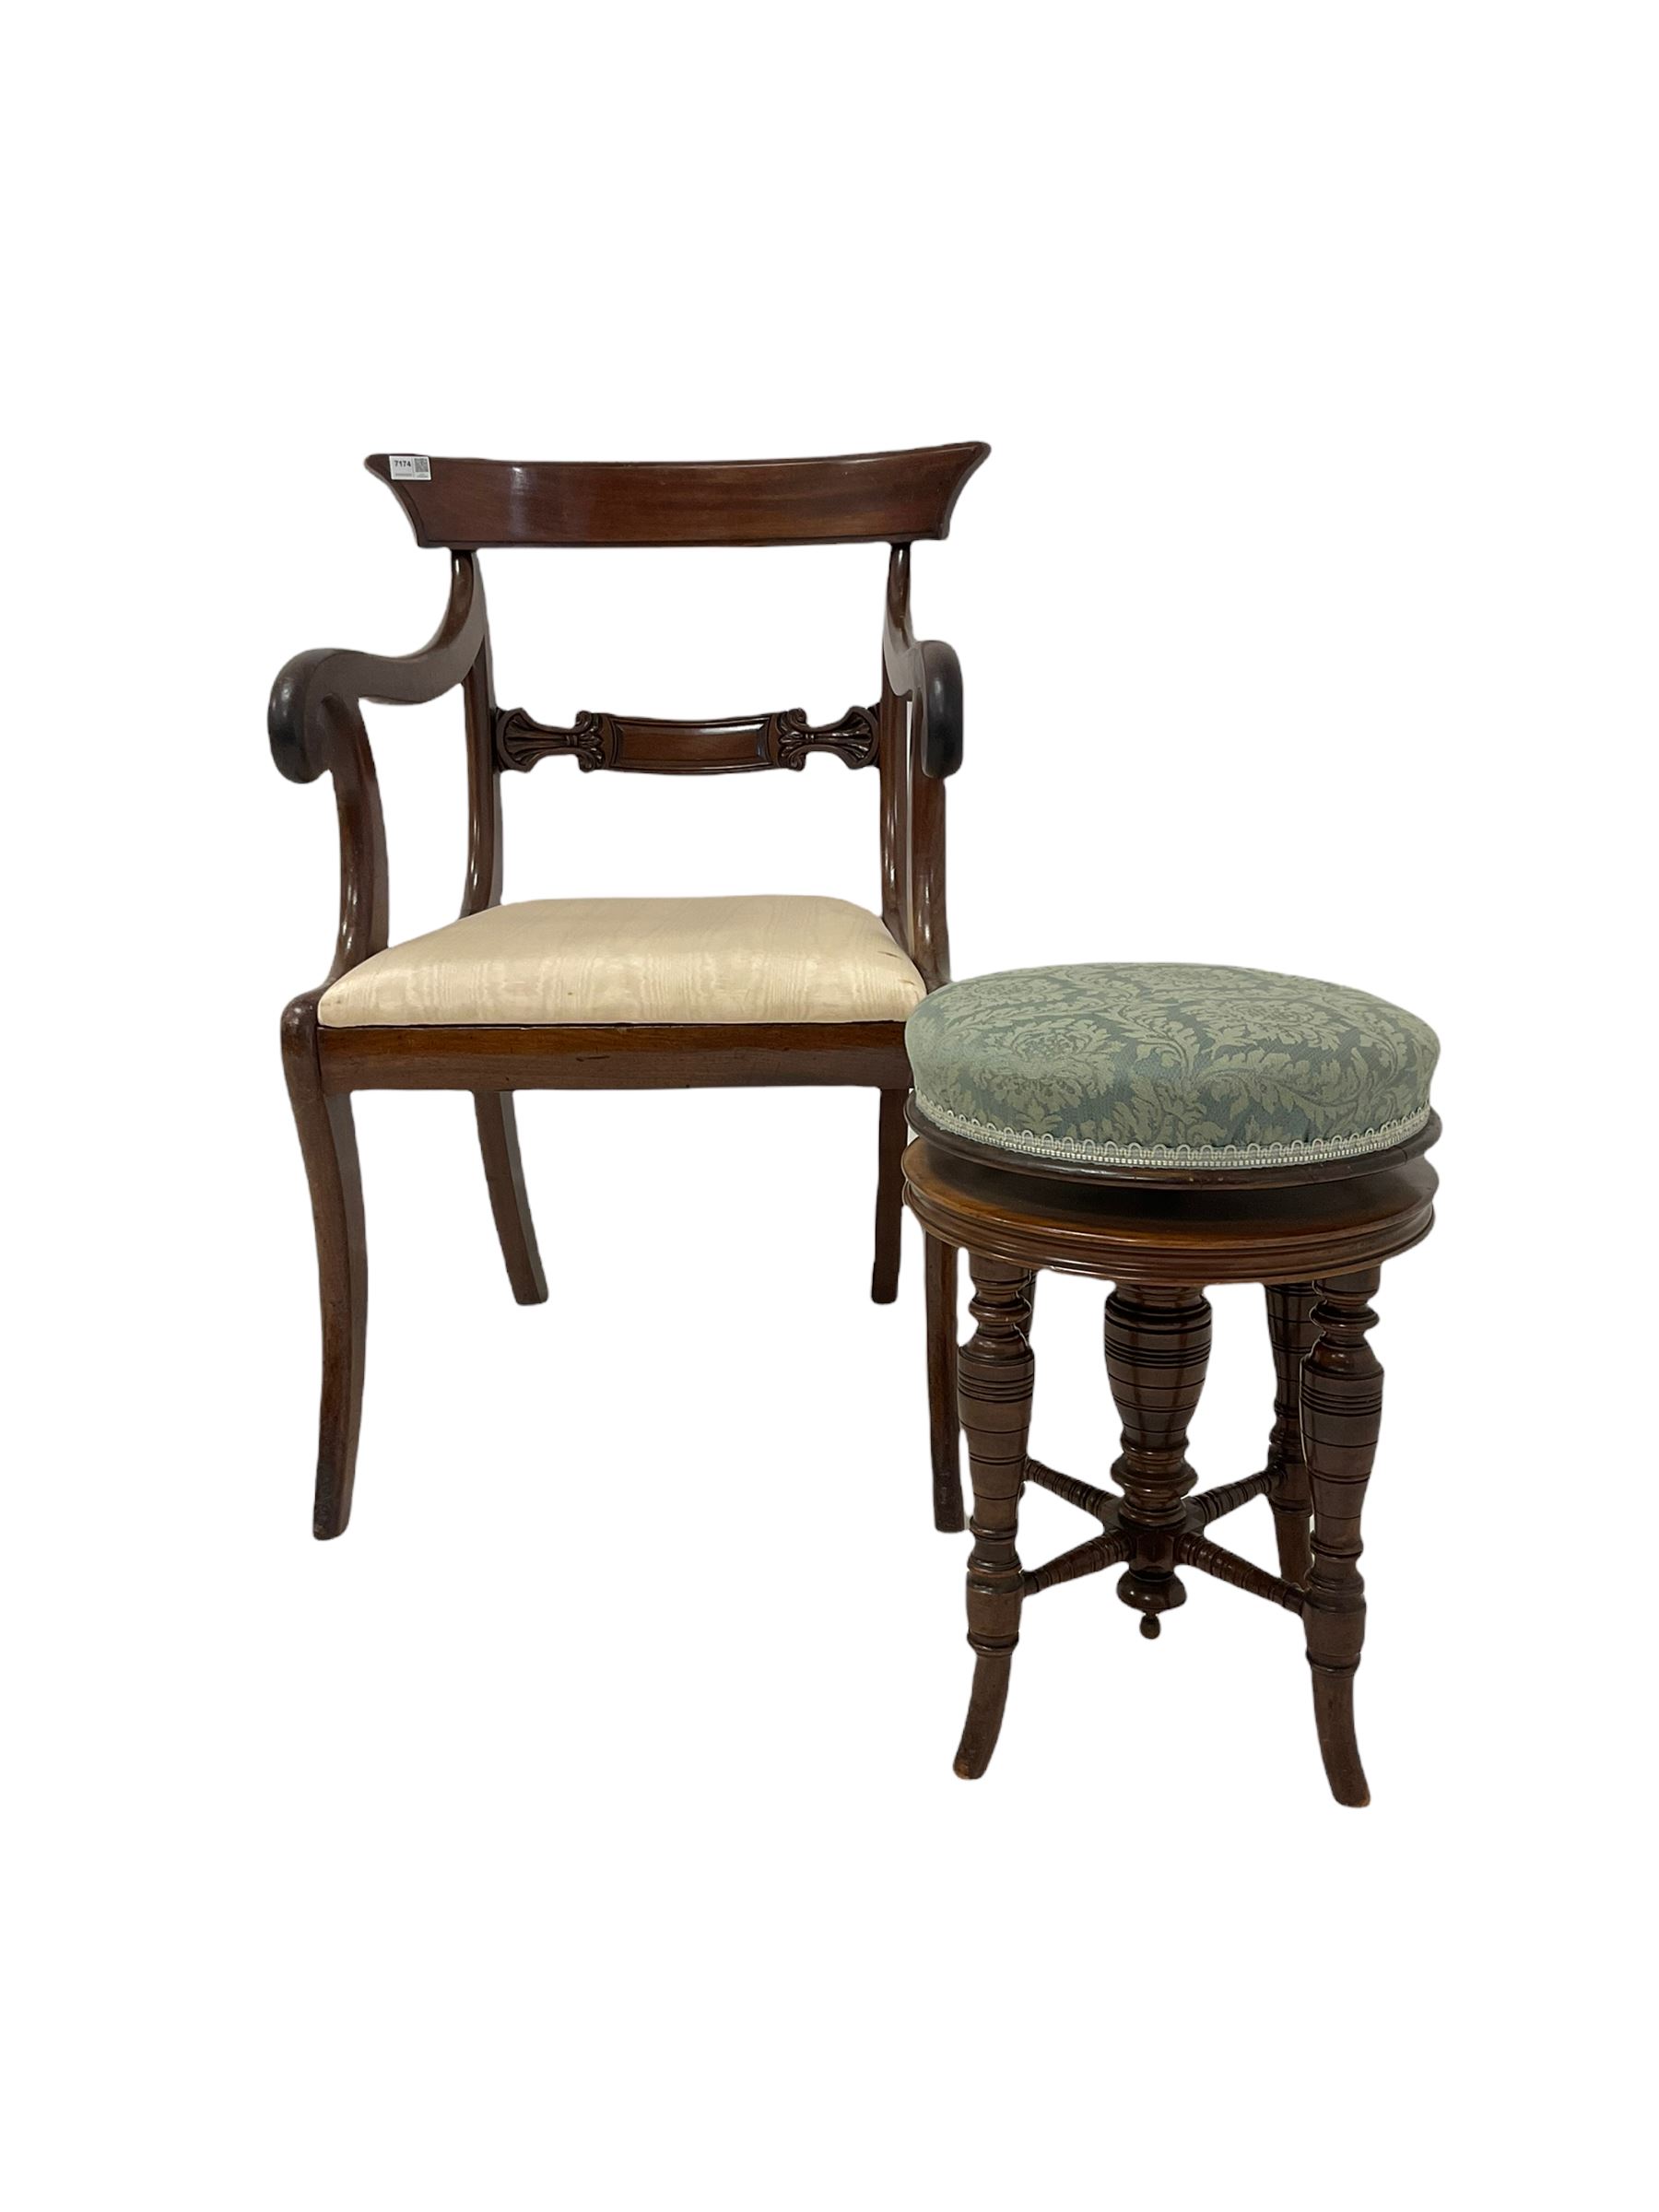 Mahogany regency style carver chair - Image 2 of 4